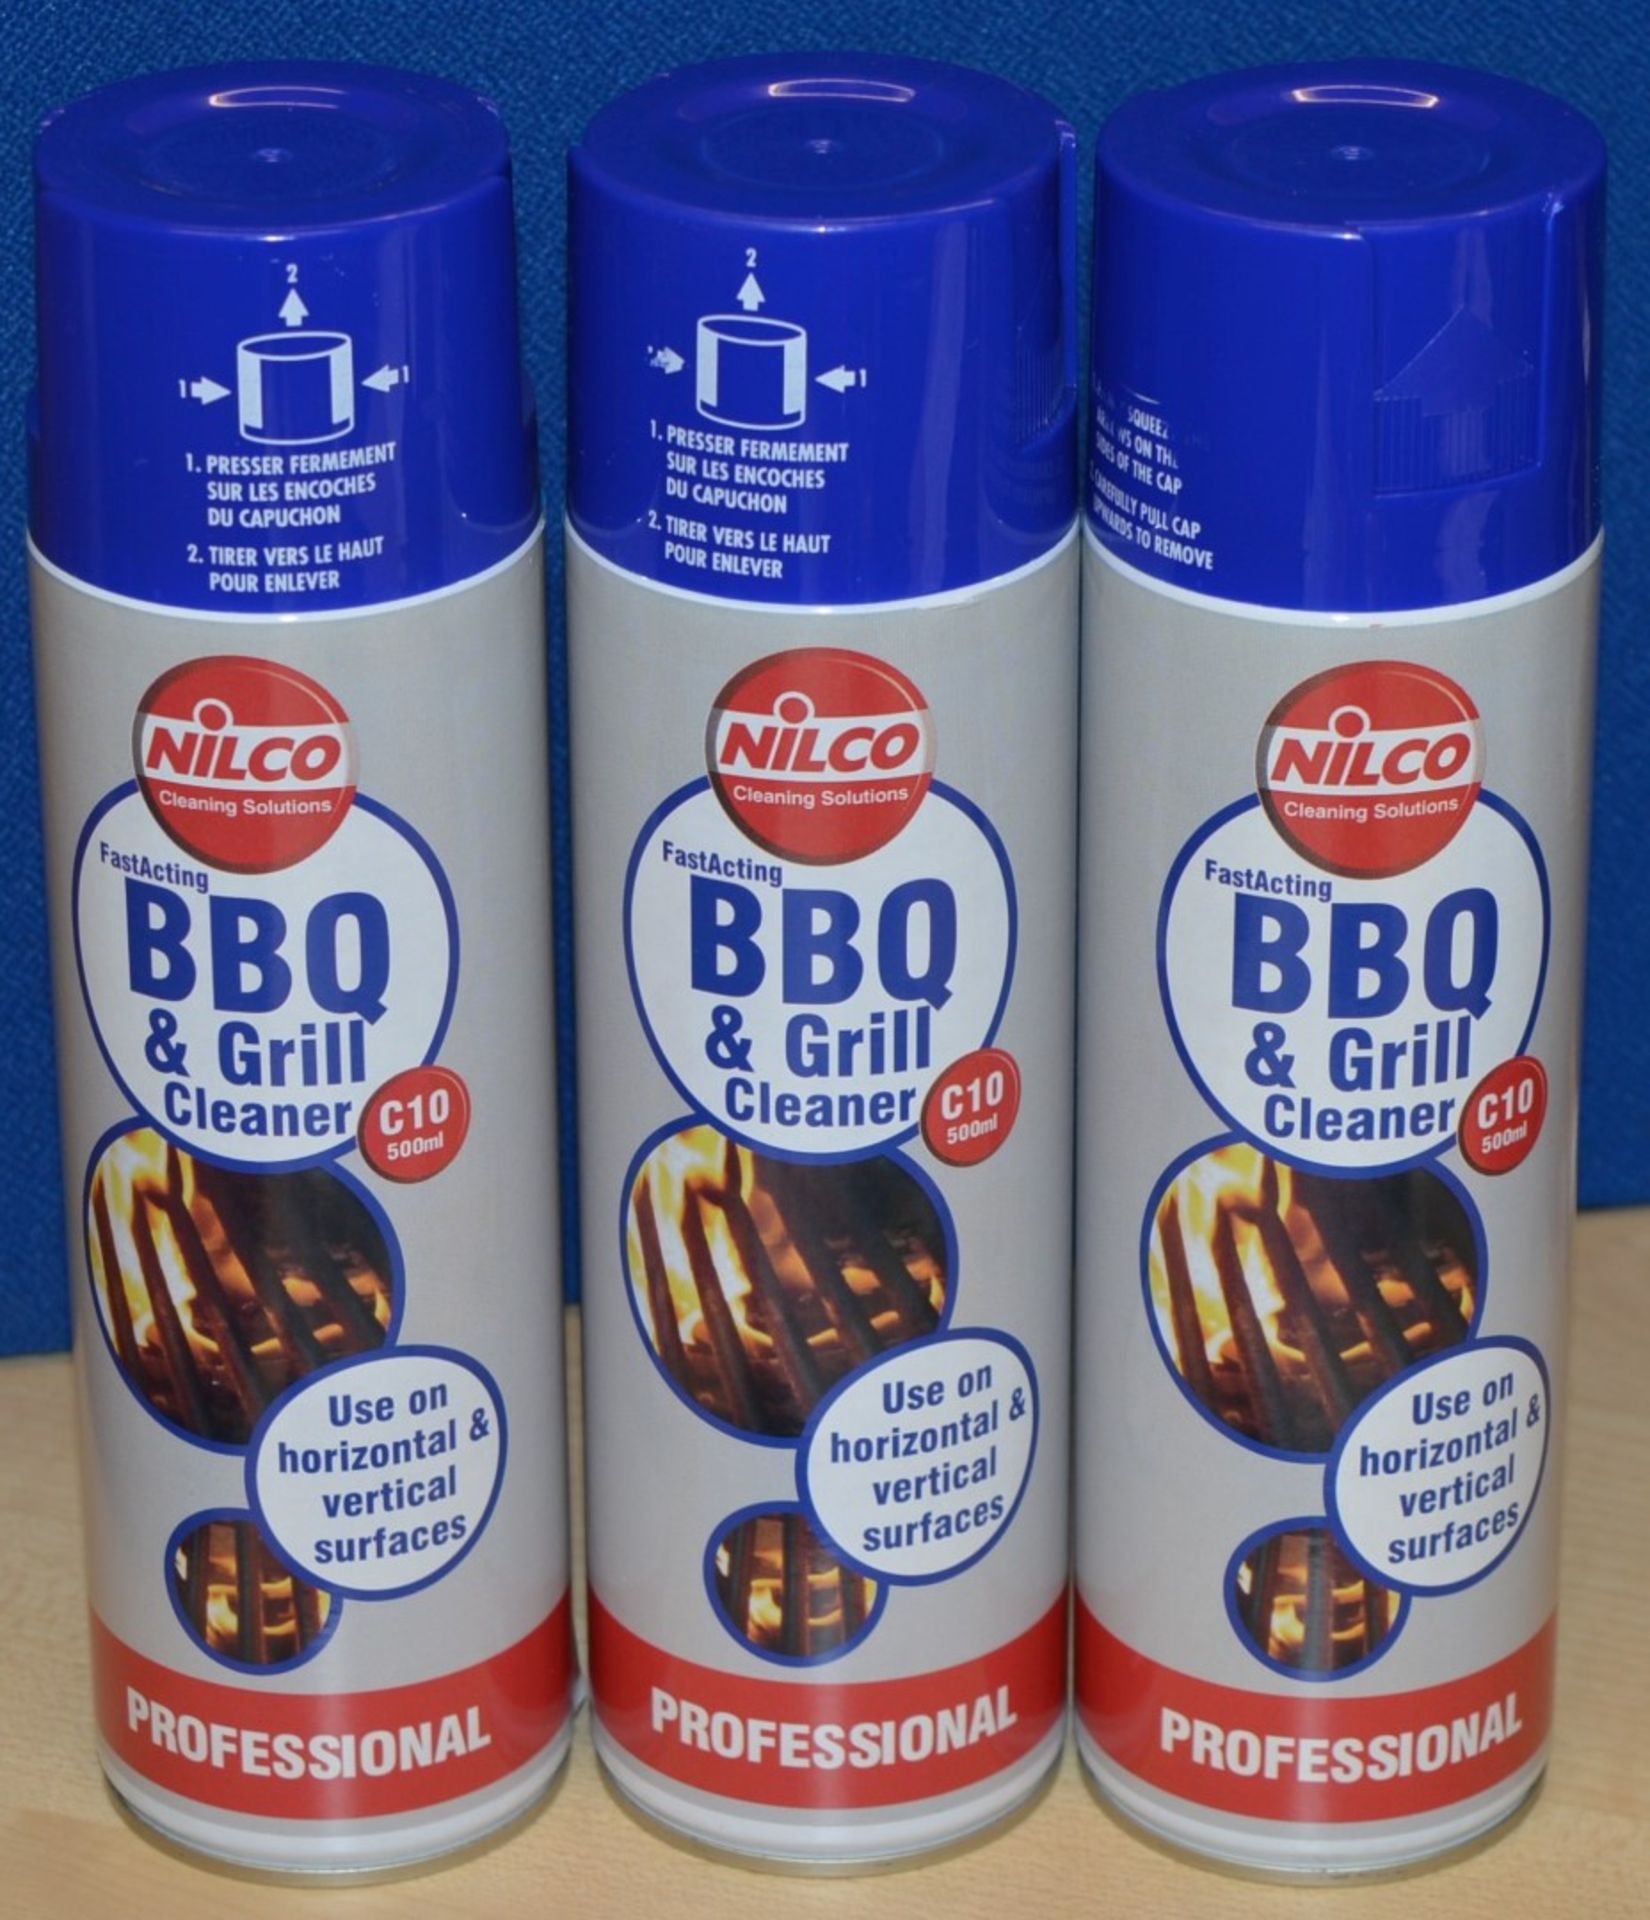 6 x Professional Fast Acting BBQ & GRILL Cleaner - Includes 6 x C10 500ml Bottles - Nilco Cleaning S